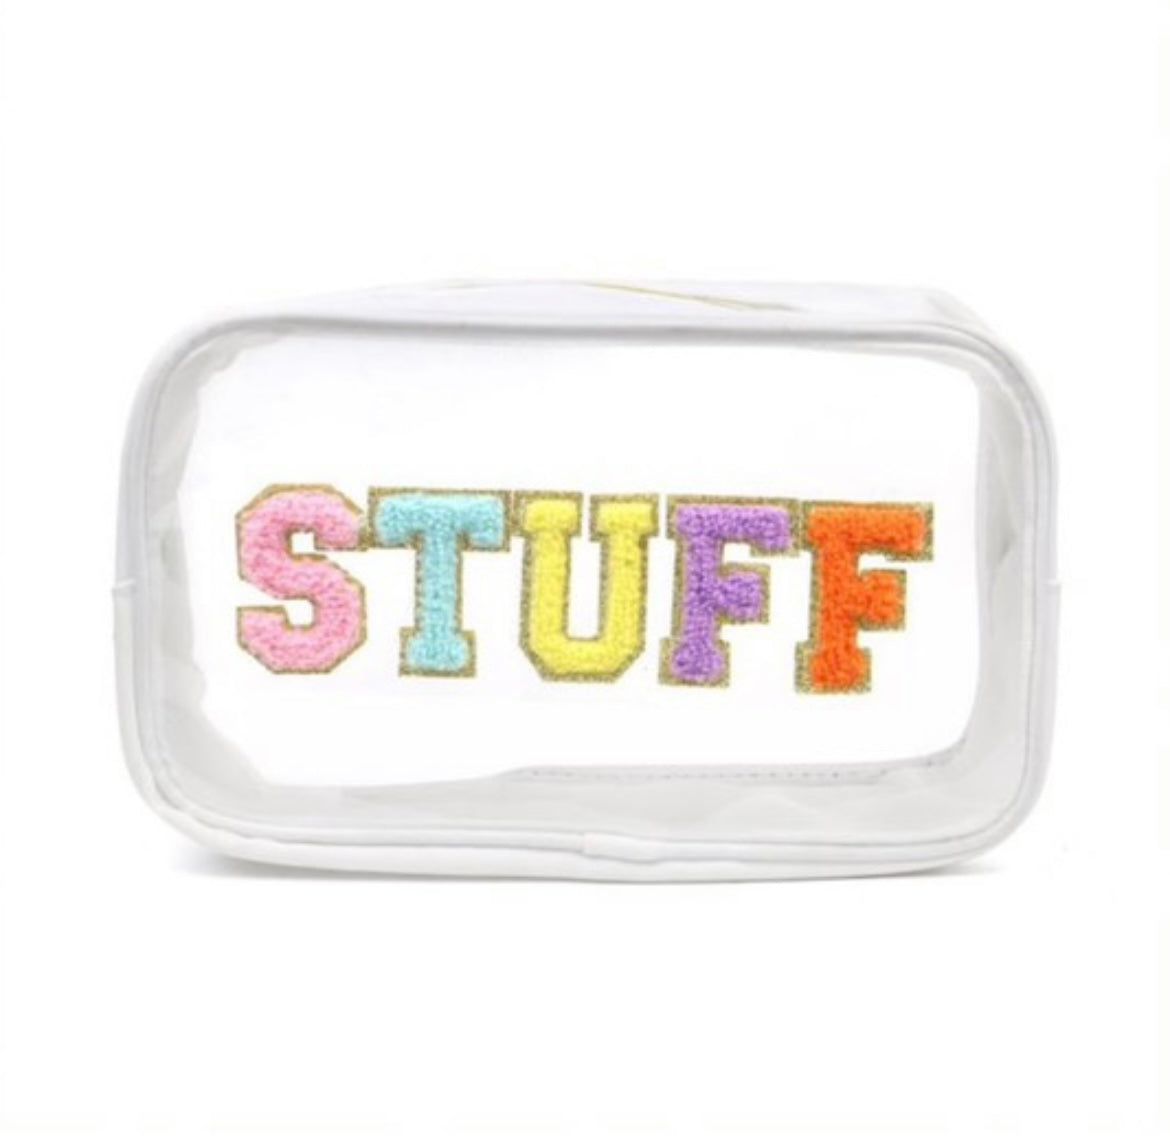 stuff letter patch cosmetic bag